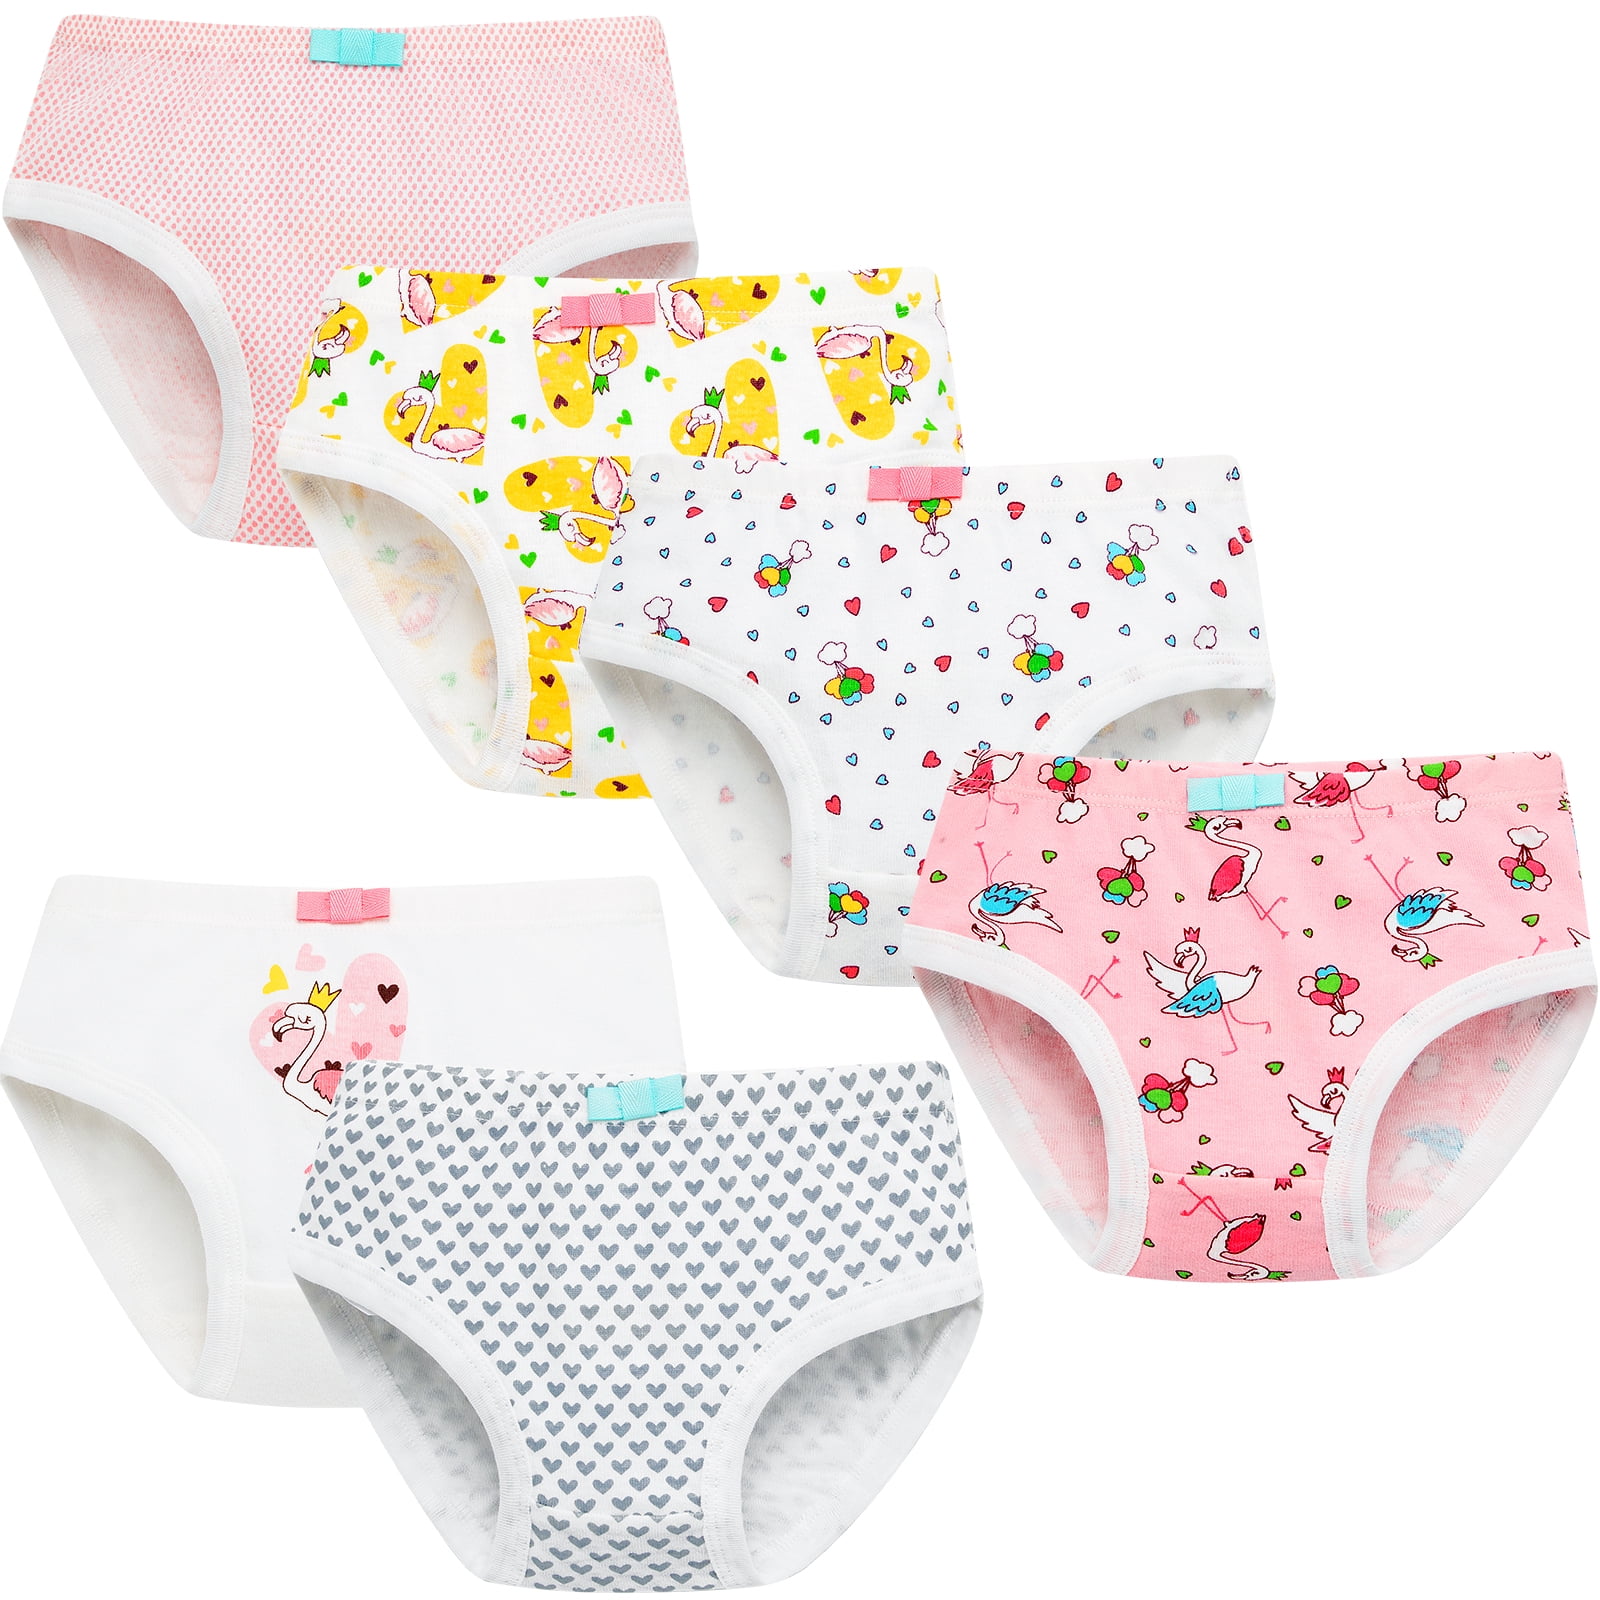 5 Pcs/lot Girls Panties Cotton Kids Beautiful Underwear Cartoon Children  Briefs Girls Breathable Triangle Underpants For Girls Color: 5-20GS021, Kid  Size: XXL(For 11-14 Years)